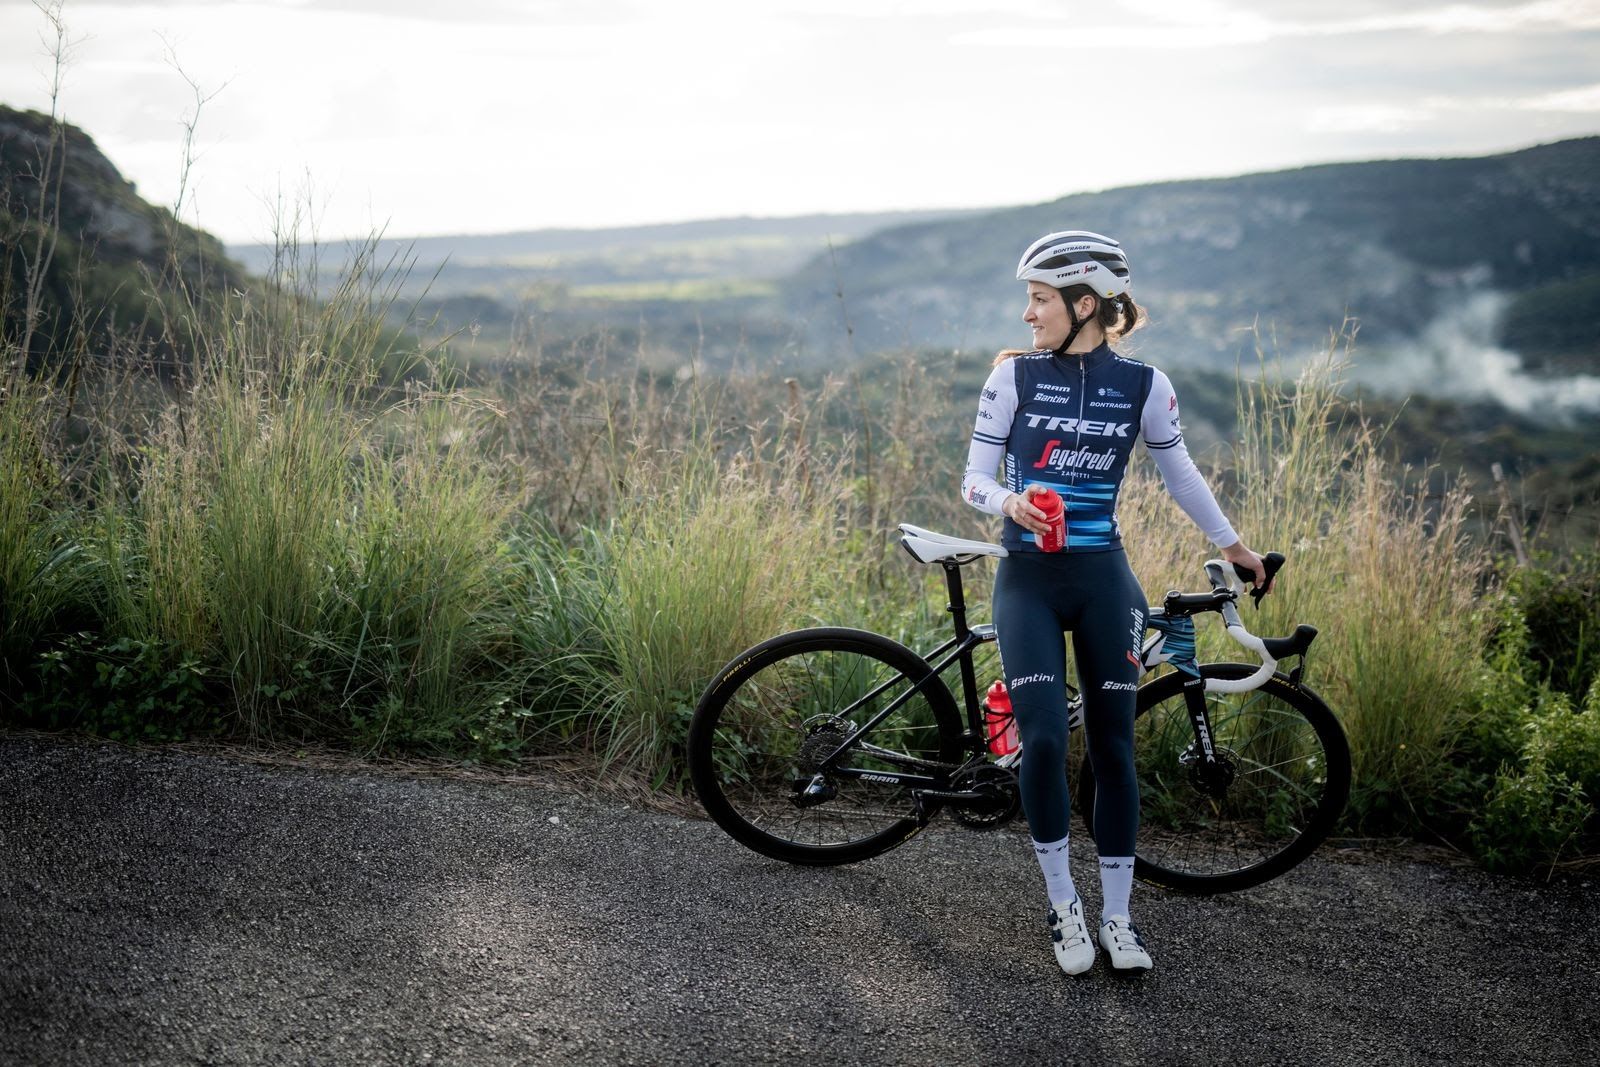 Women cyclists set to debut in &quot;hell of the north&quot;